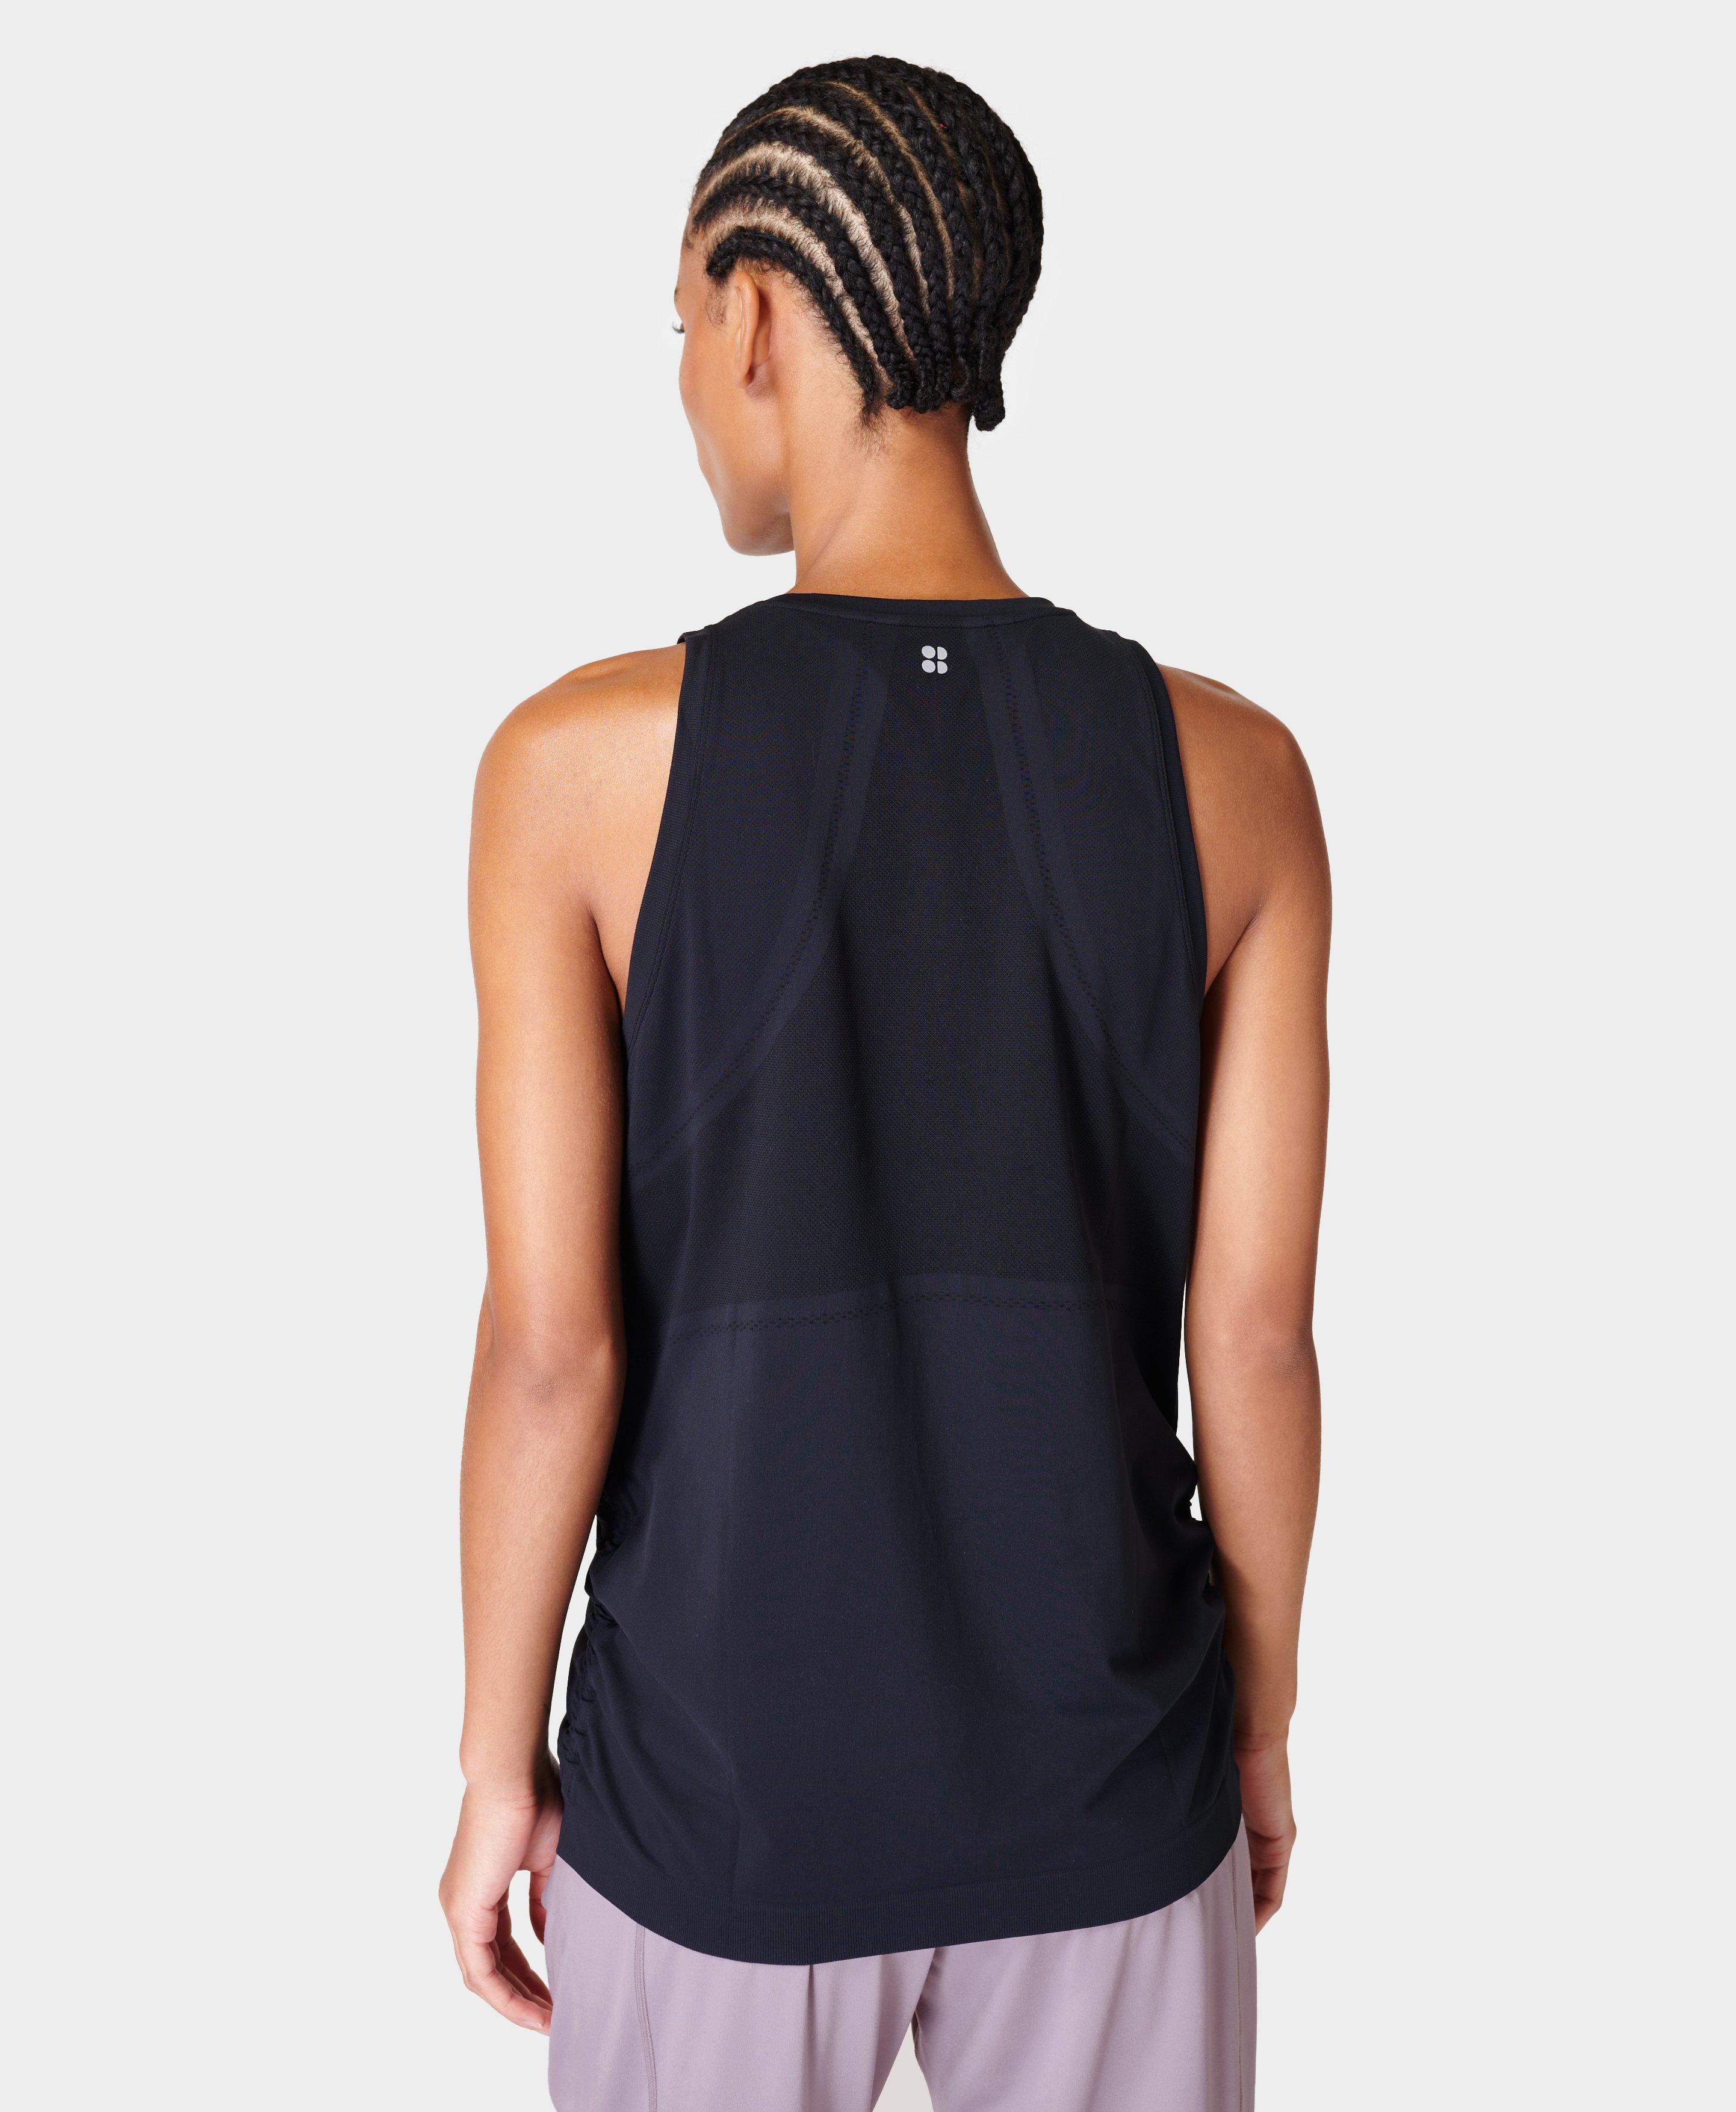 Womens Yoga Vest With Naked Feeling Skin Moisture Absorption And  Perspiration Perfect For Sports, Running, Fitness And Fashion Tanks From  Luyogastar, $16.29